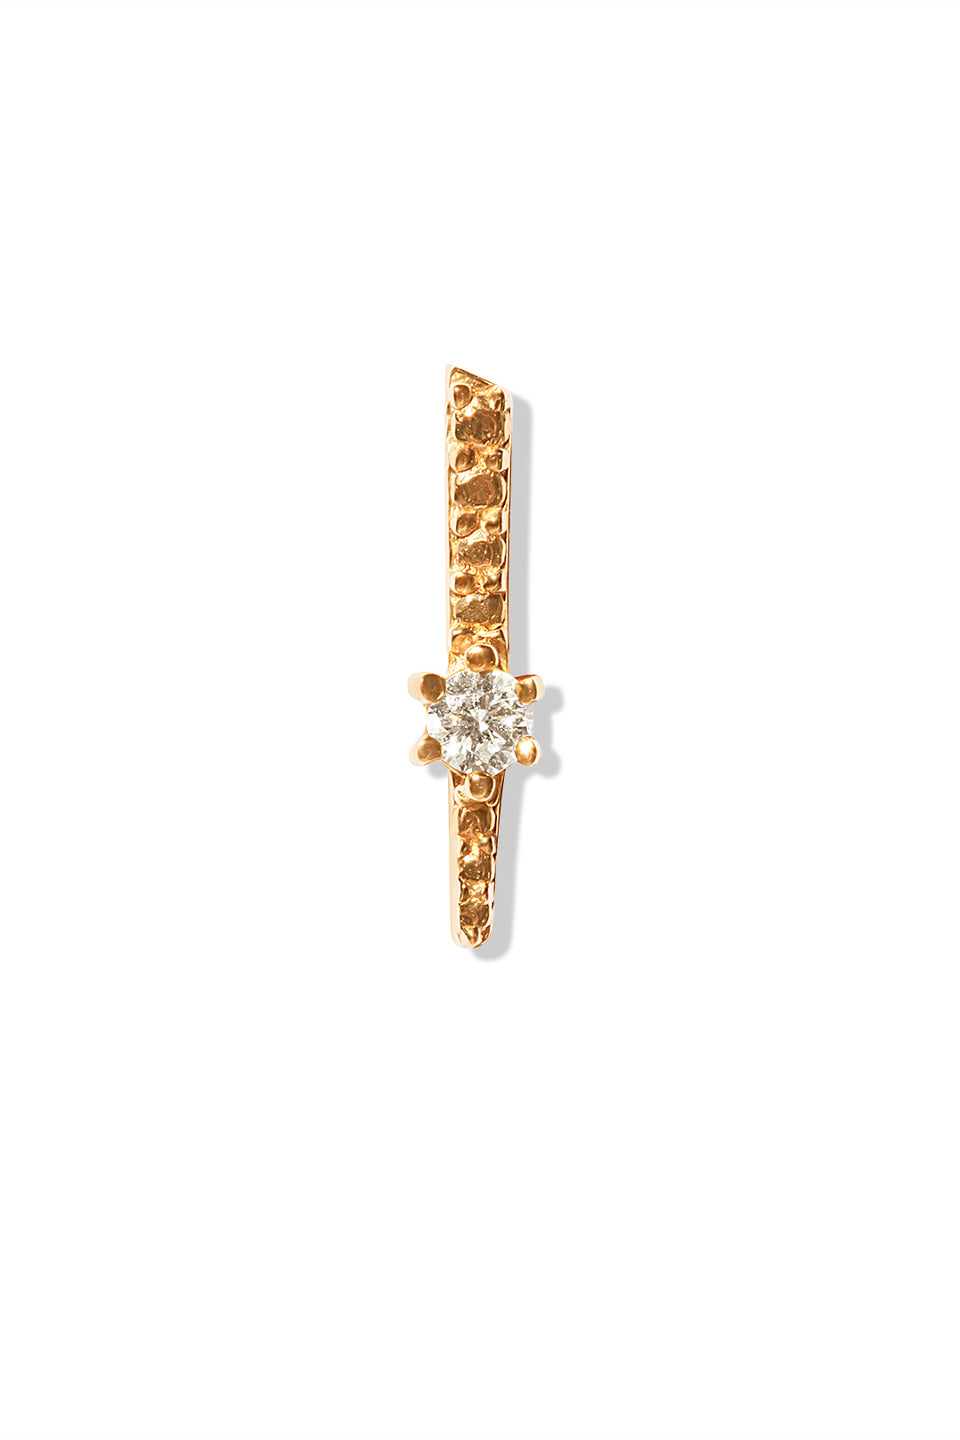 14k yellow gold bar stud with an attached cruelty-free pave circle diamond 